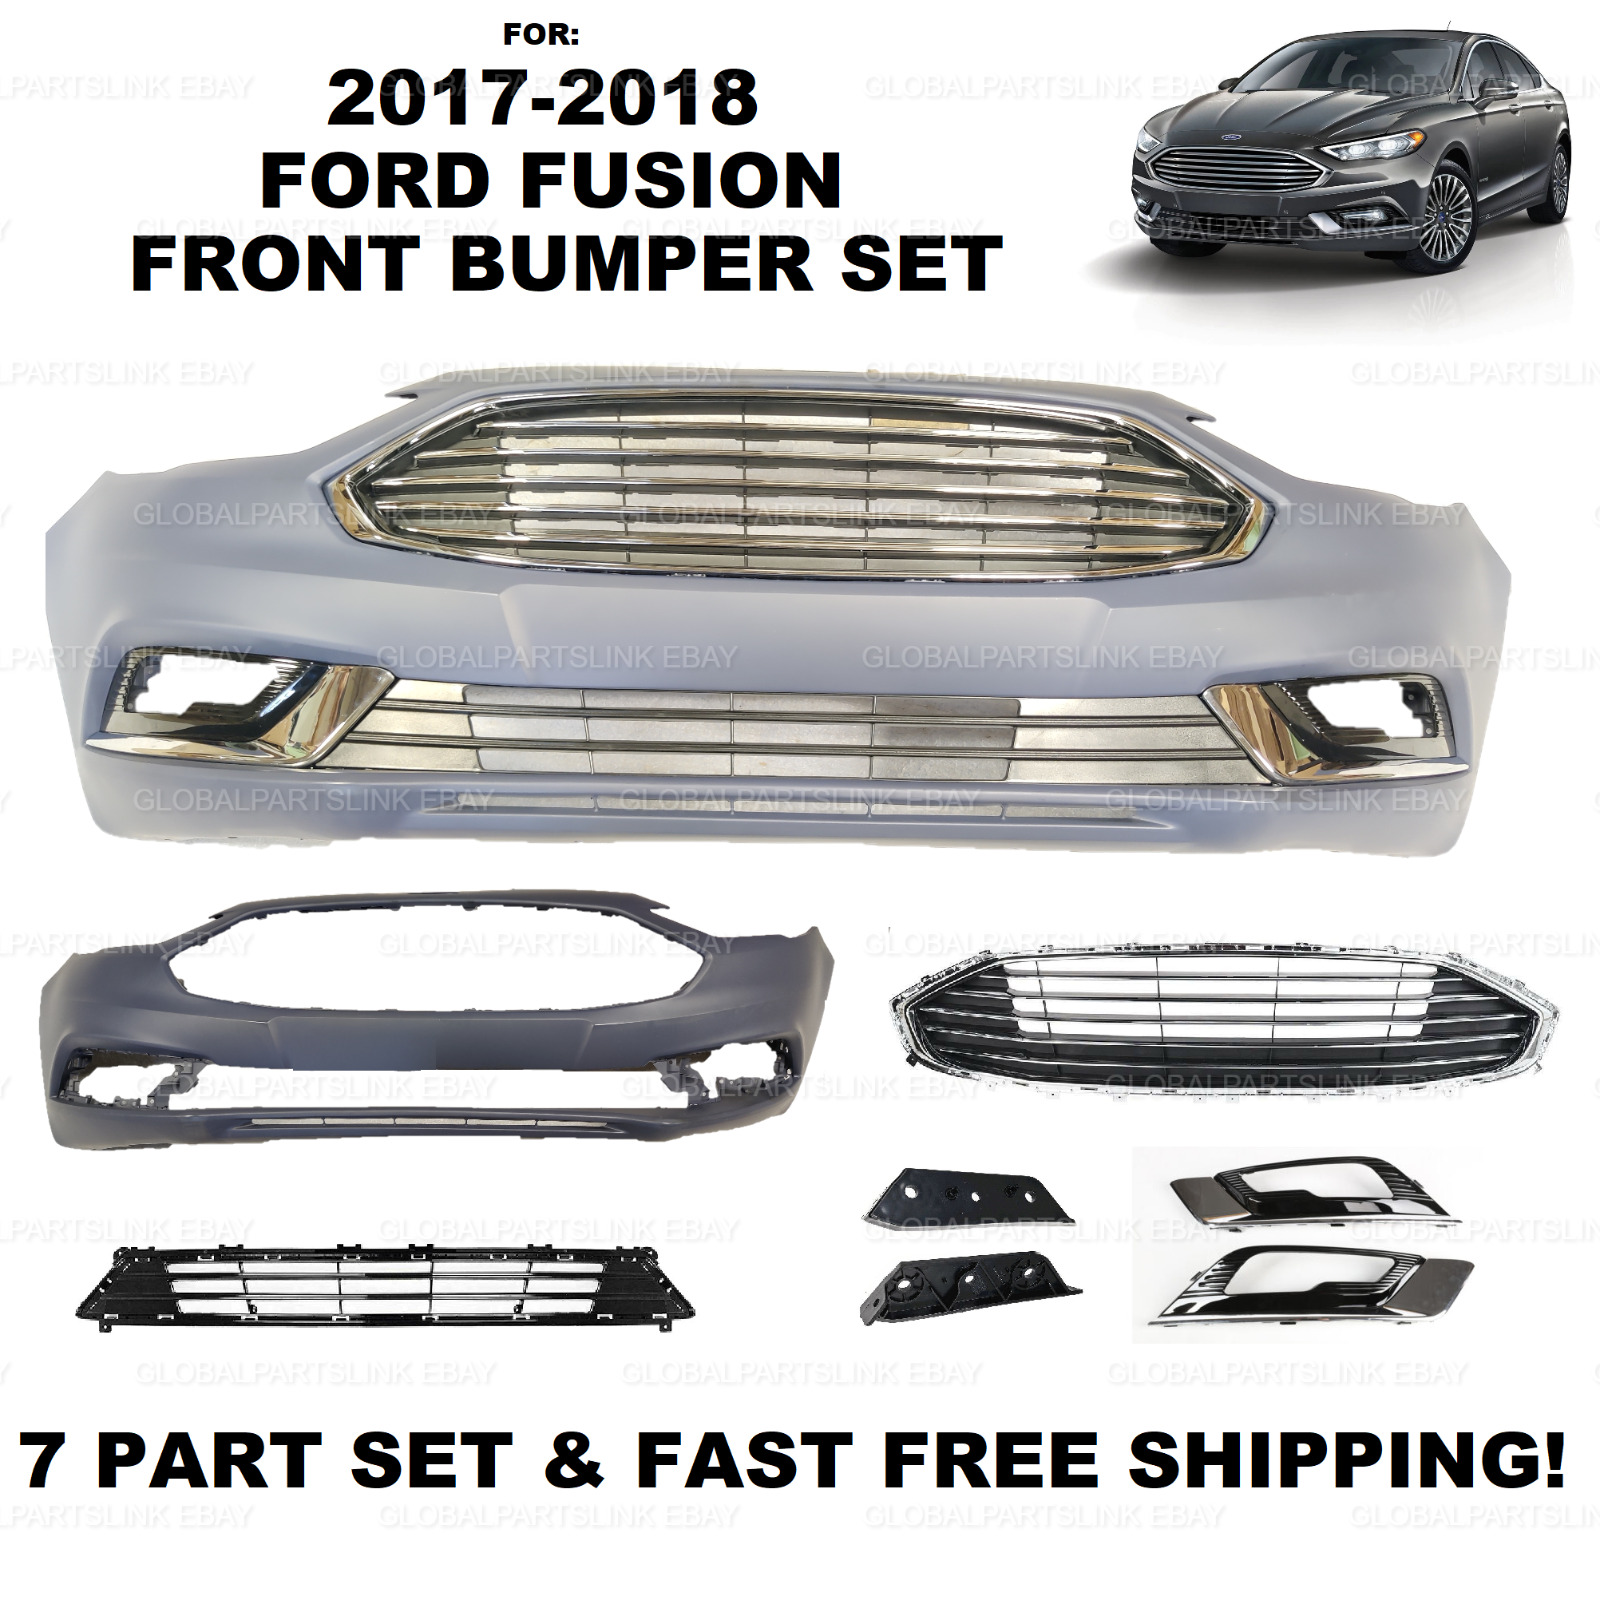 FOR 2017 2018 FORD FUSION FRONT BUMPER COVER ASSEMBLY TITANIUM FOG TRIM